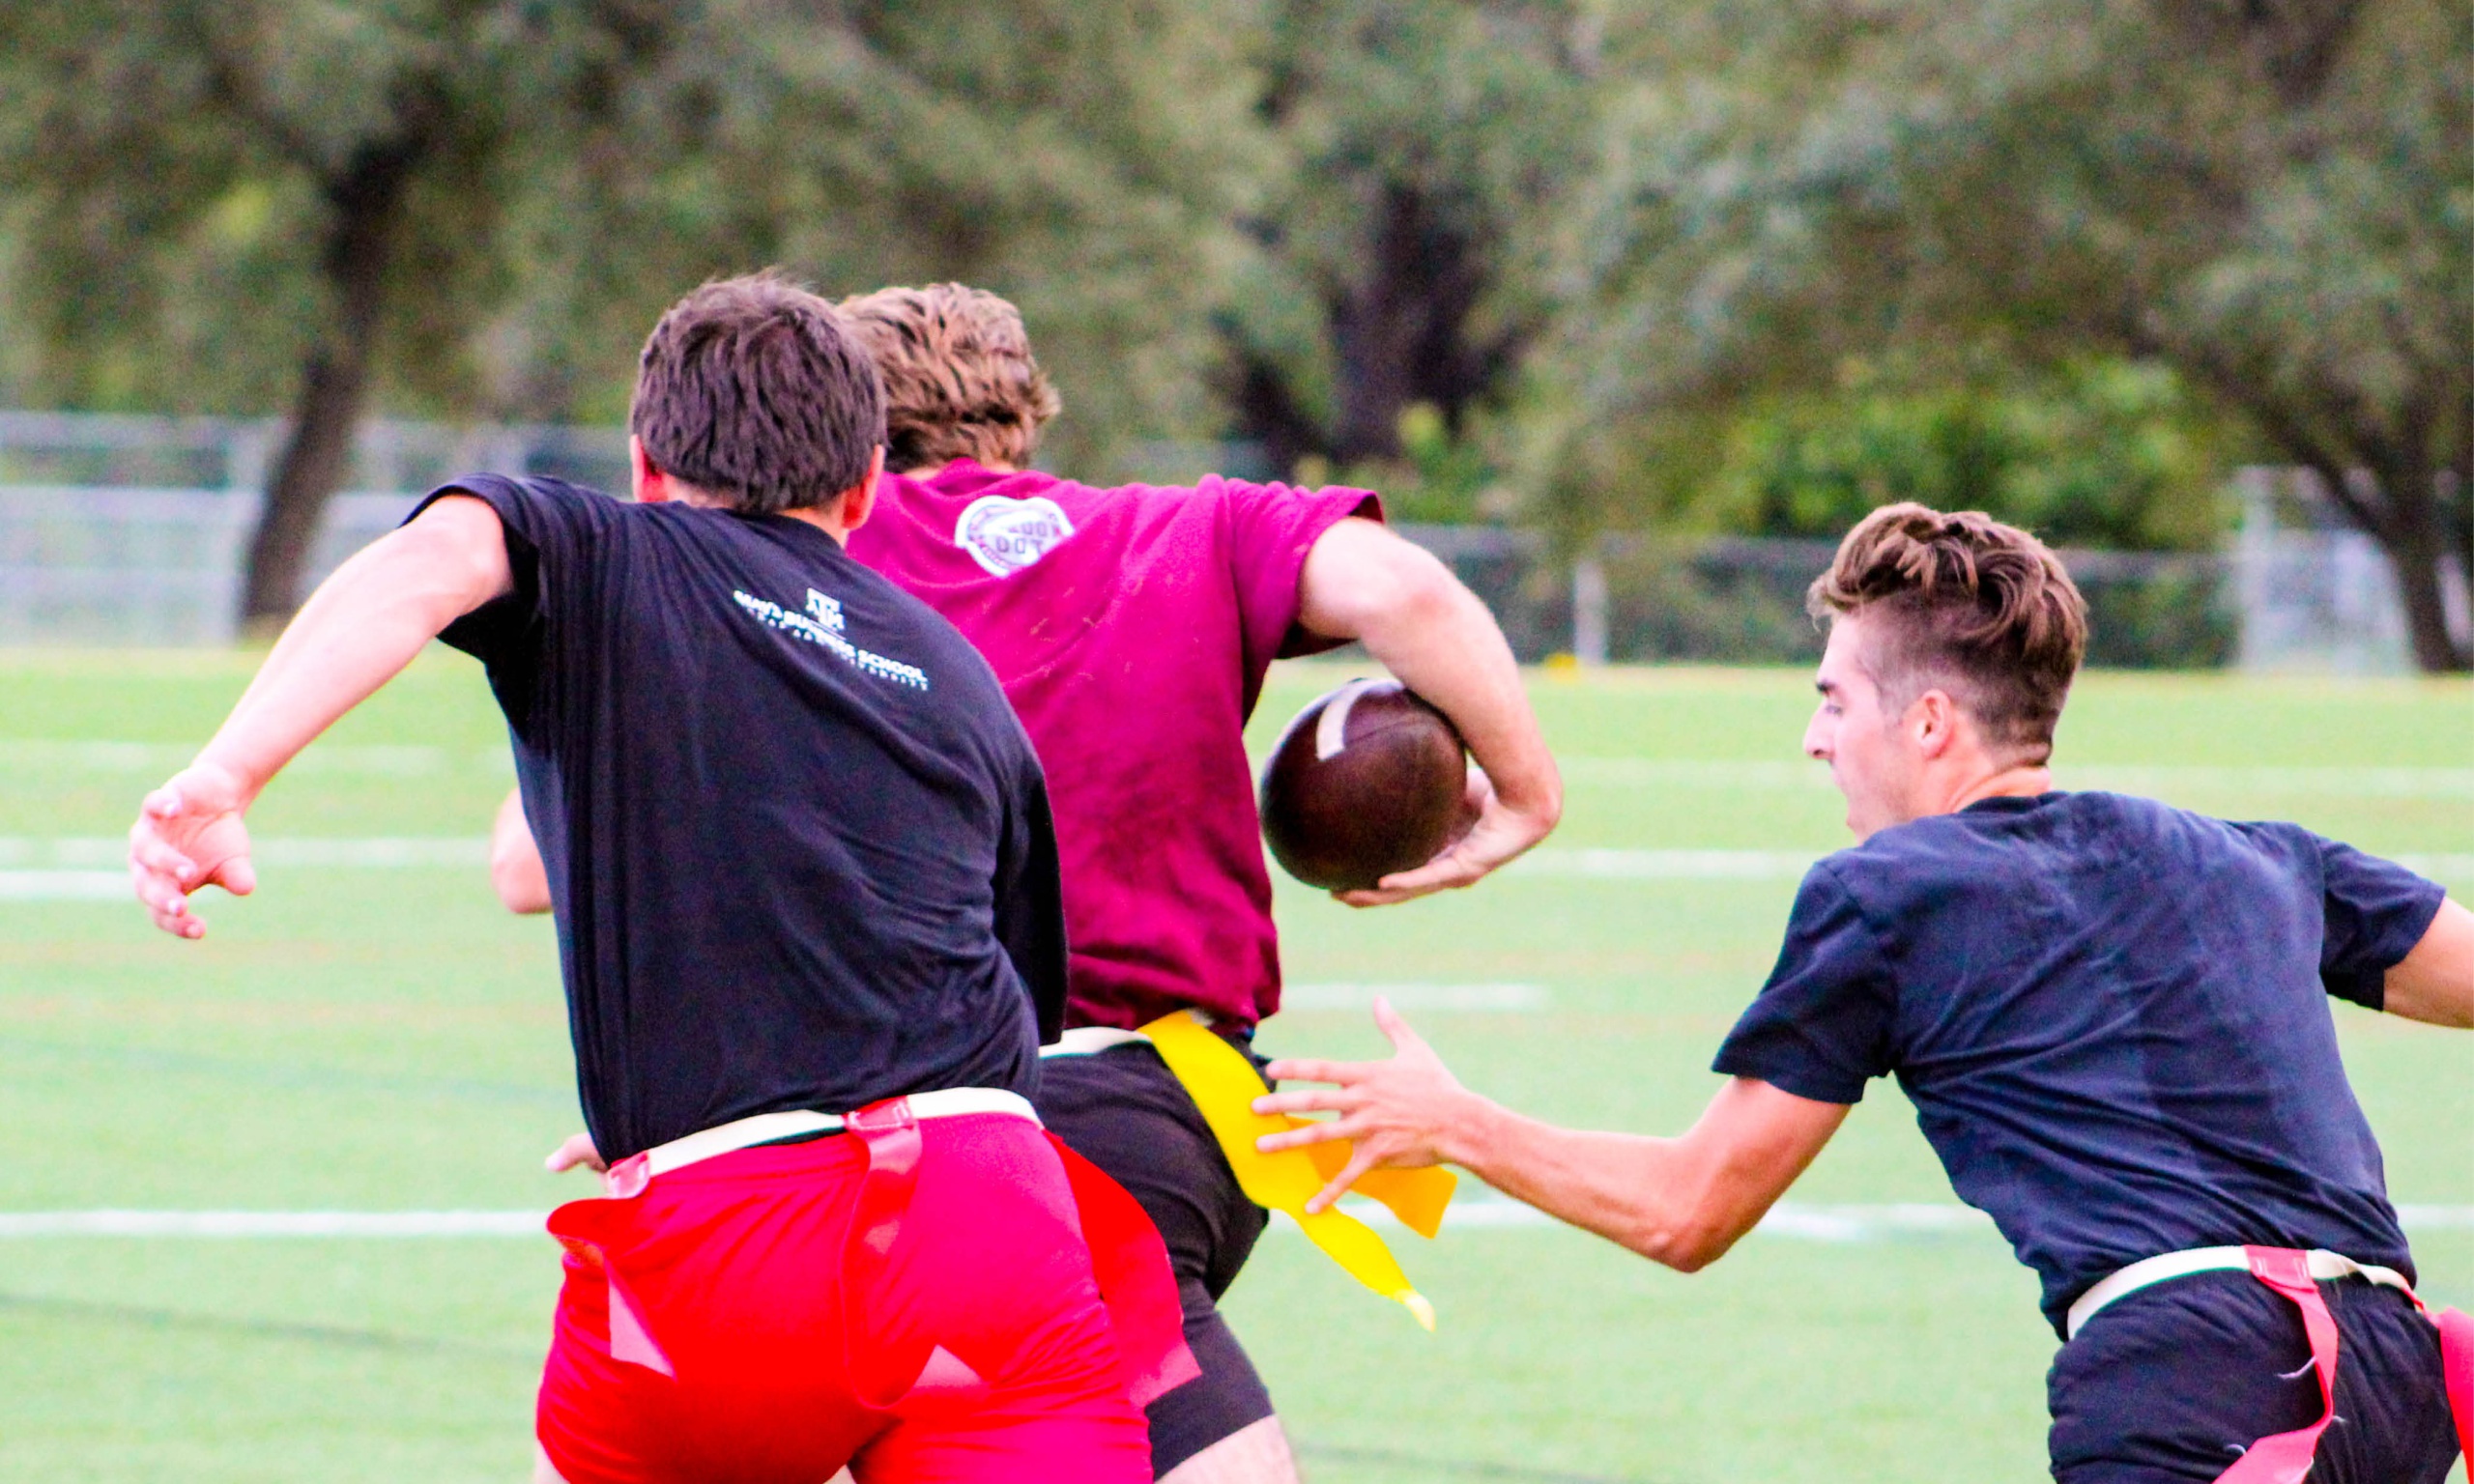 An energetic gathering of individuals playing Intramural football.